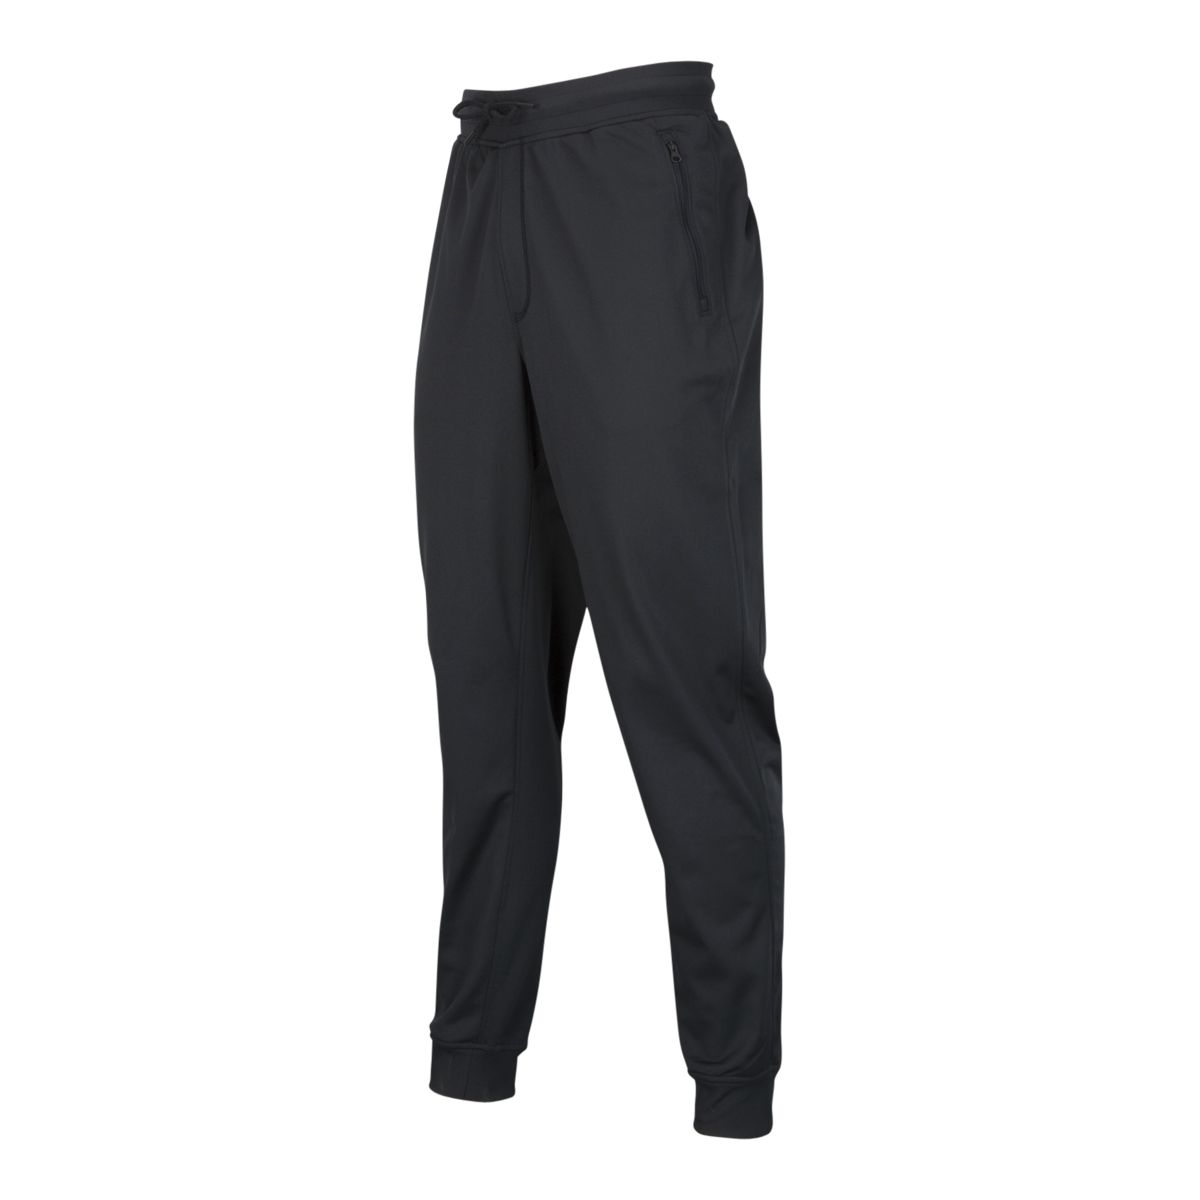 Under Armour Men's Sportstyle Sweatpants  Fleece Workout Tapered Loose Joggers